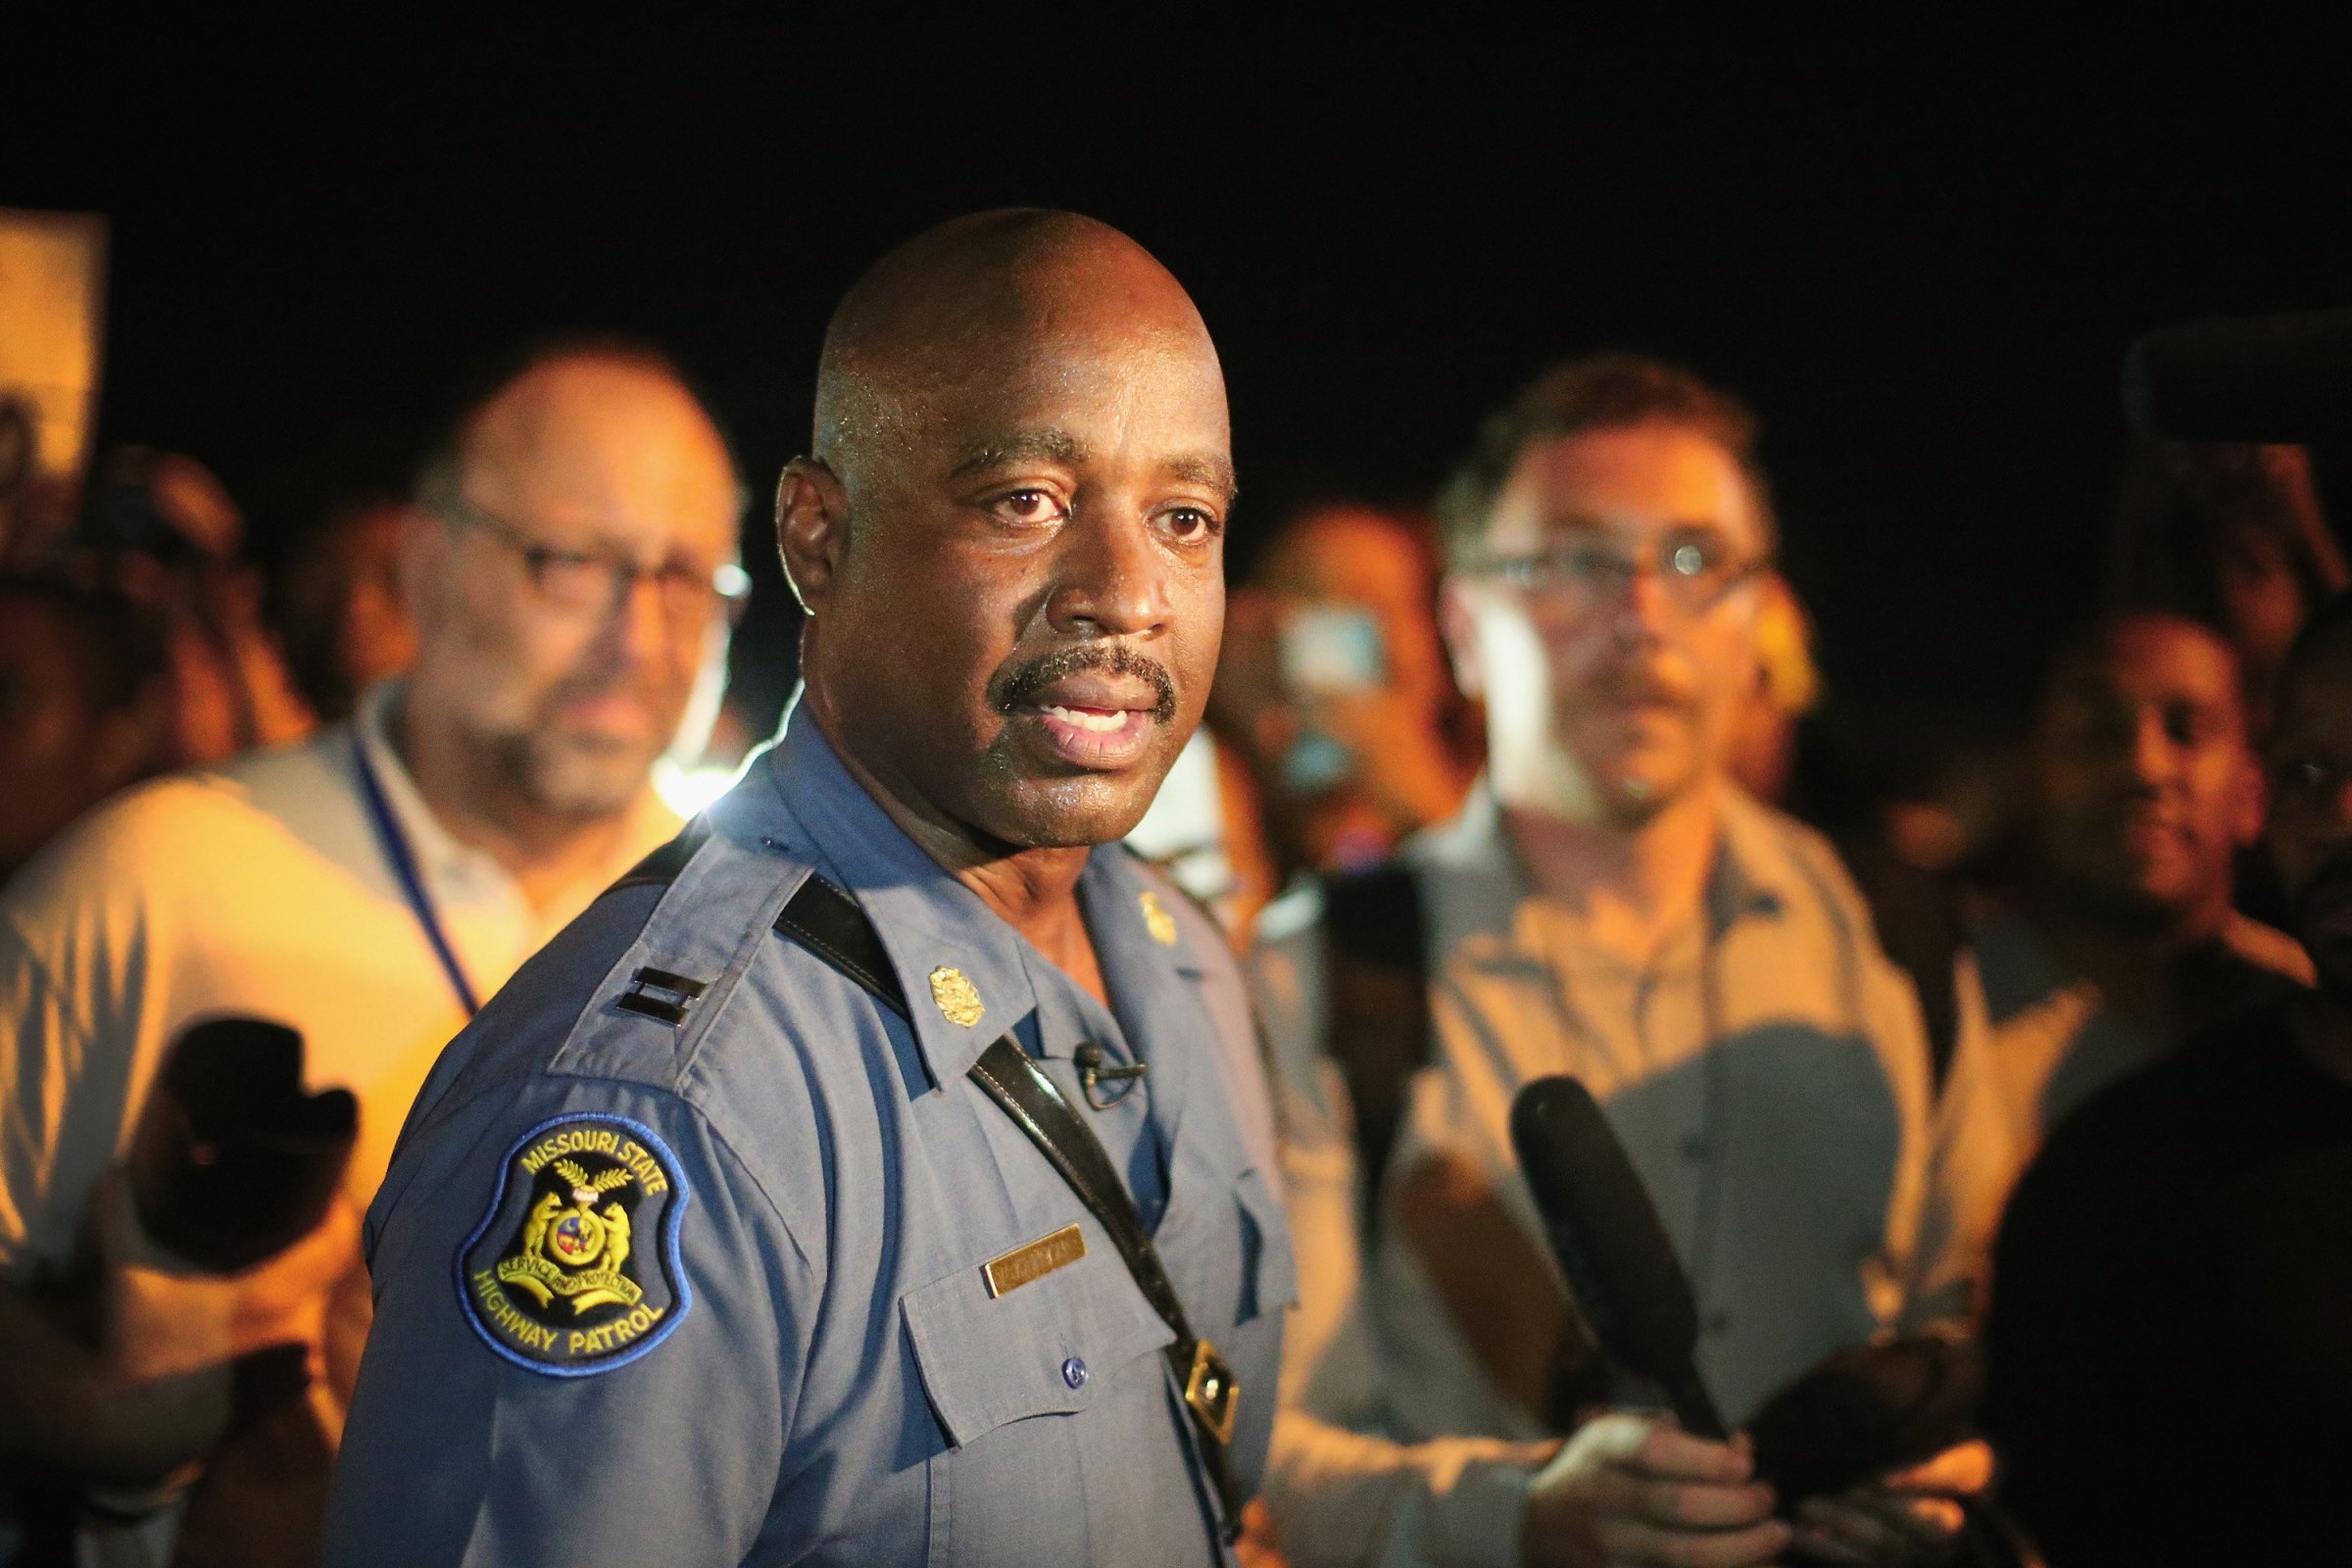 Capt. Ronald Johnson of the Missouri State Highway Patrol, who was appointed by the governor to take control of security operations in the city of Ferguson, walks among demonstrators gathered along West Florissant Avenue on August 14, 2014 in Ferguson, Missouri.